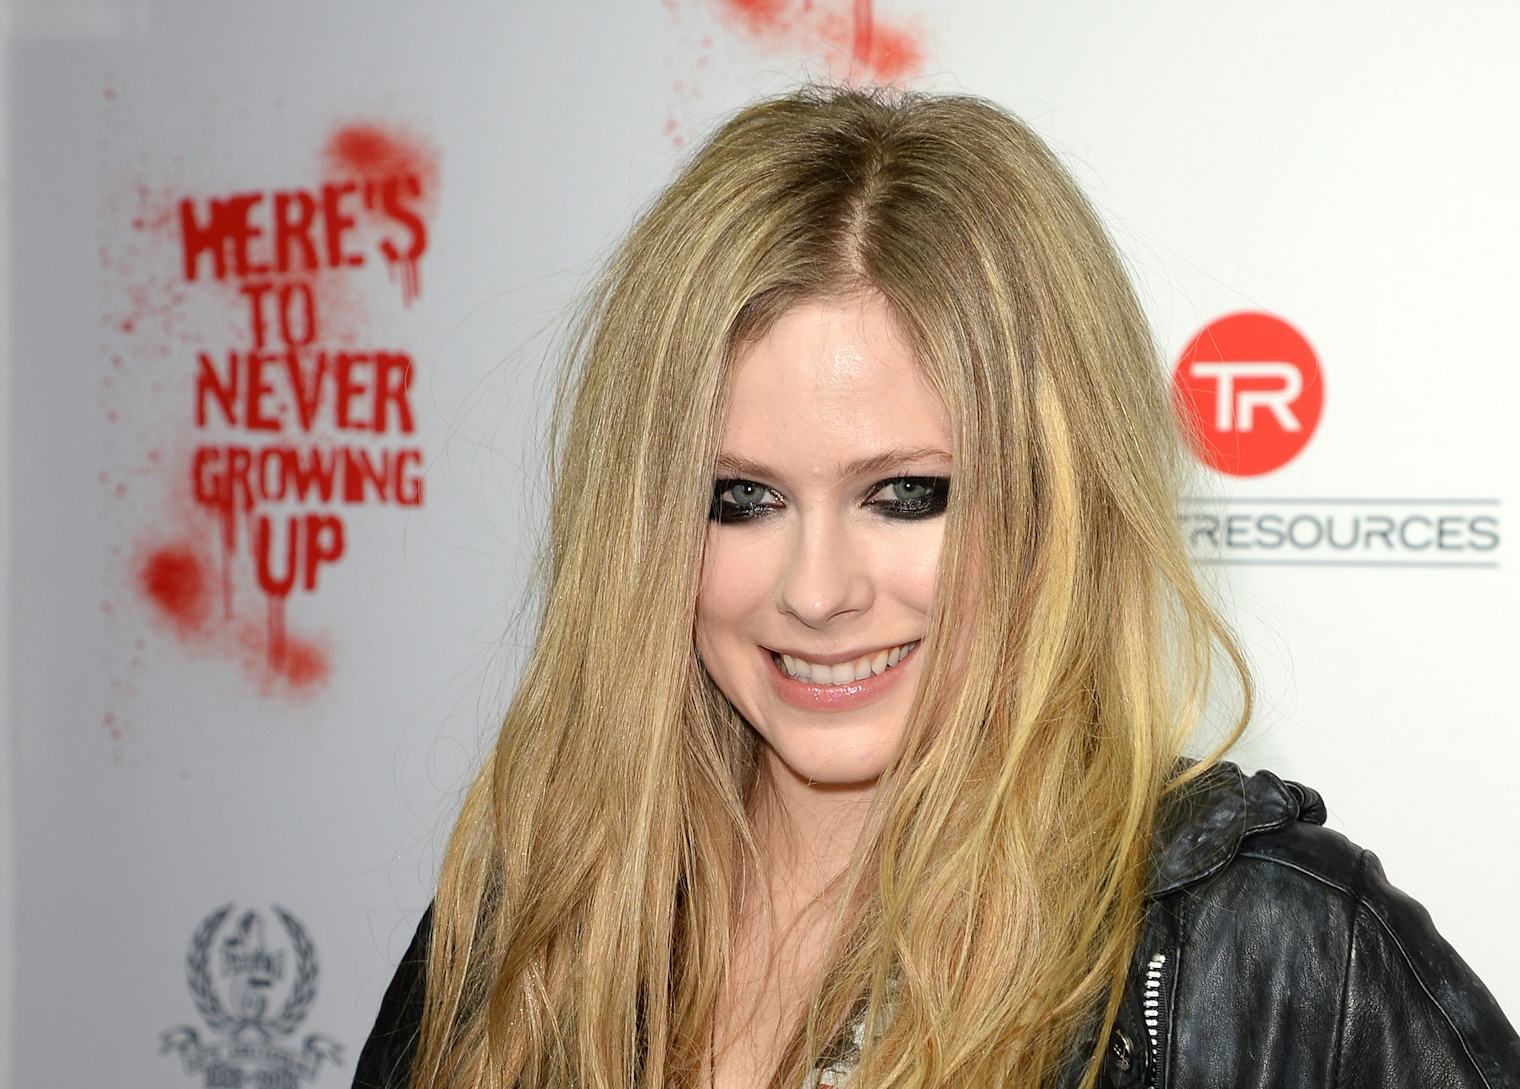 11 Avril lavigne Trends That We All try to Copy In The Early 2000s